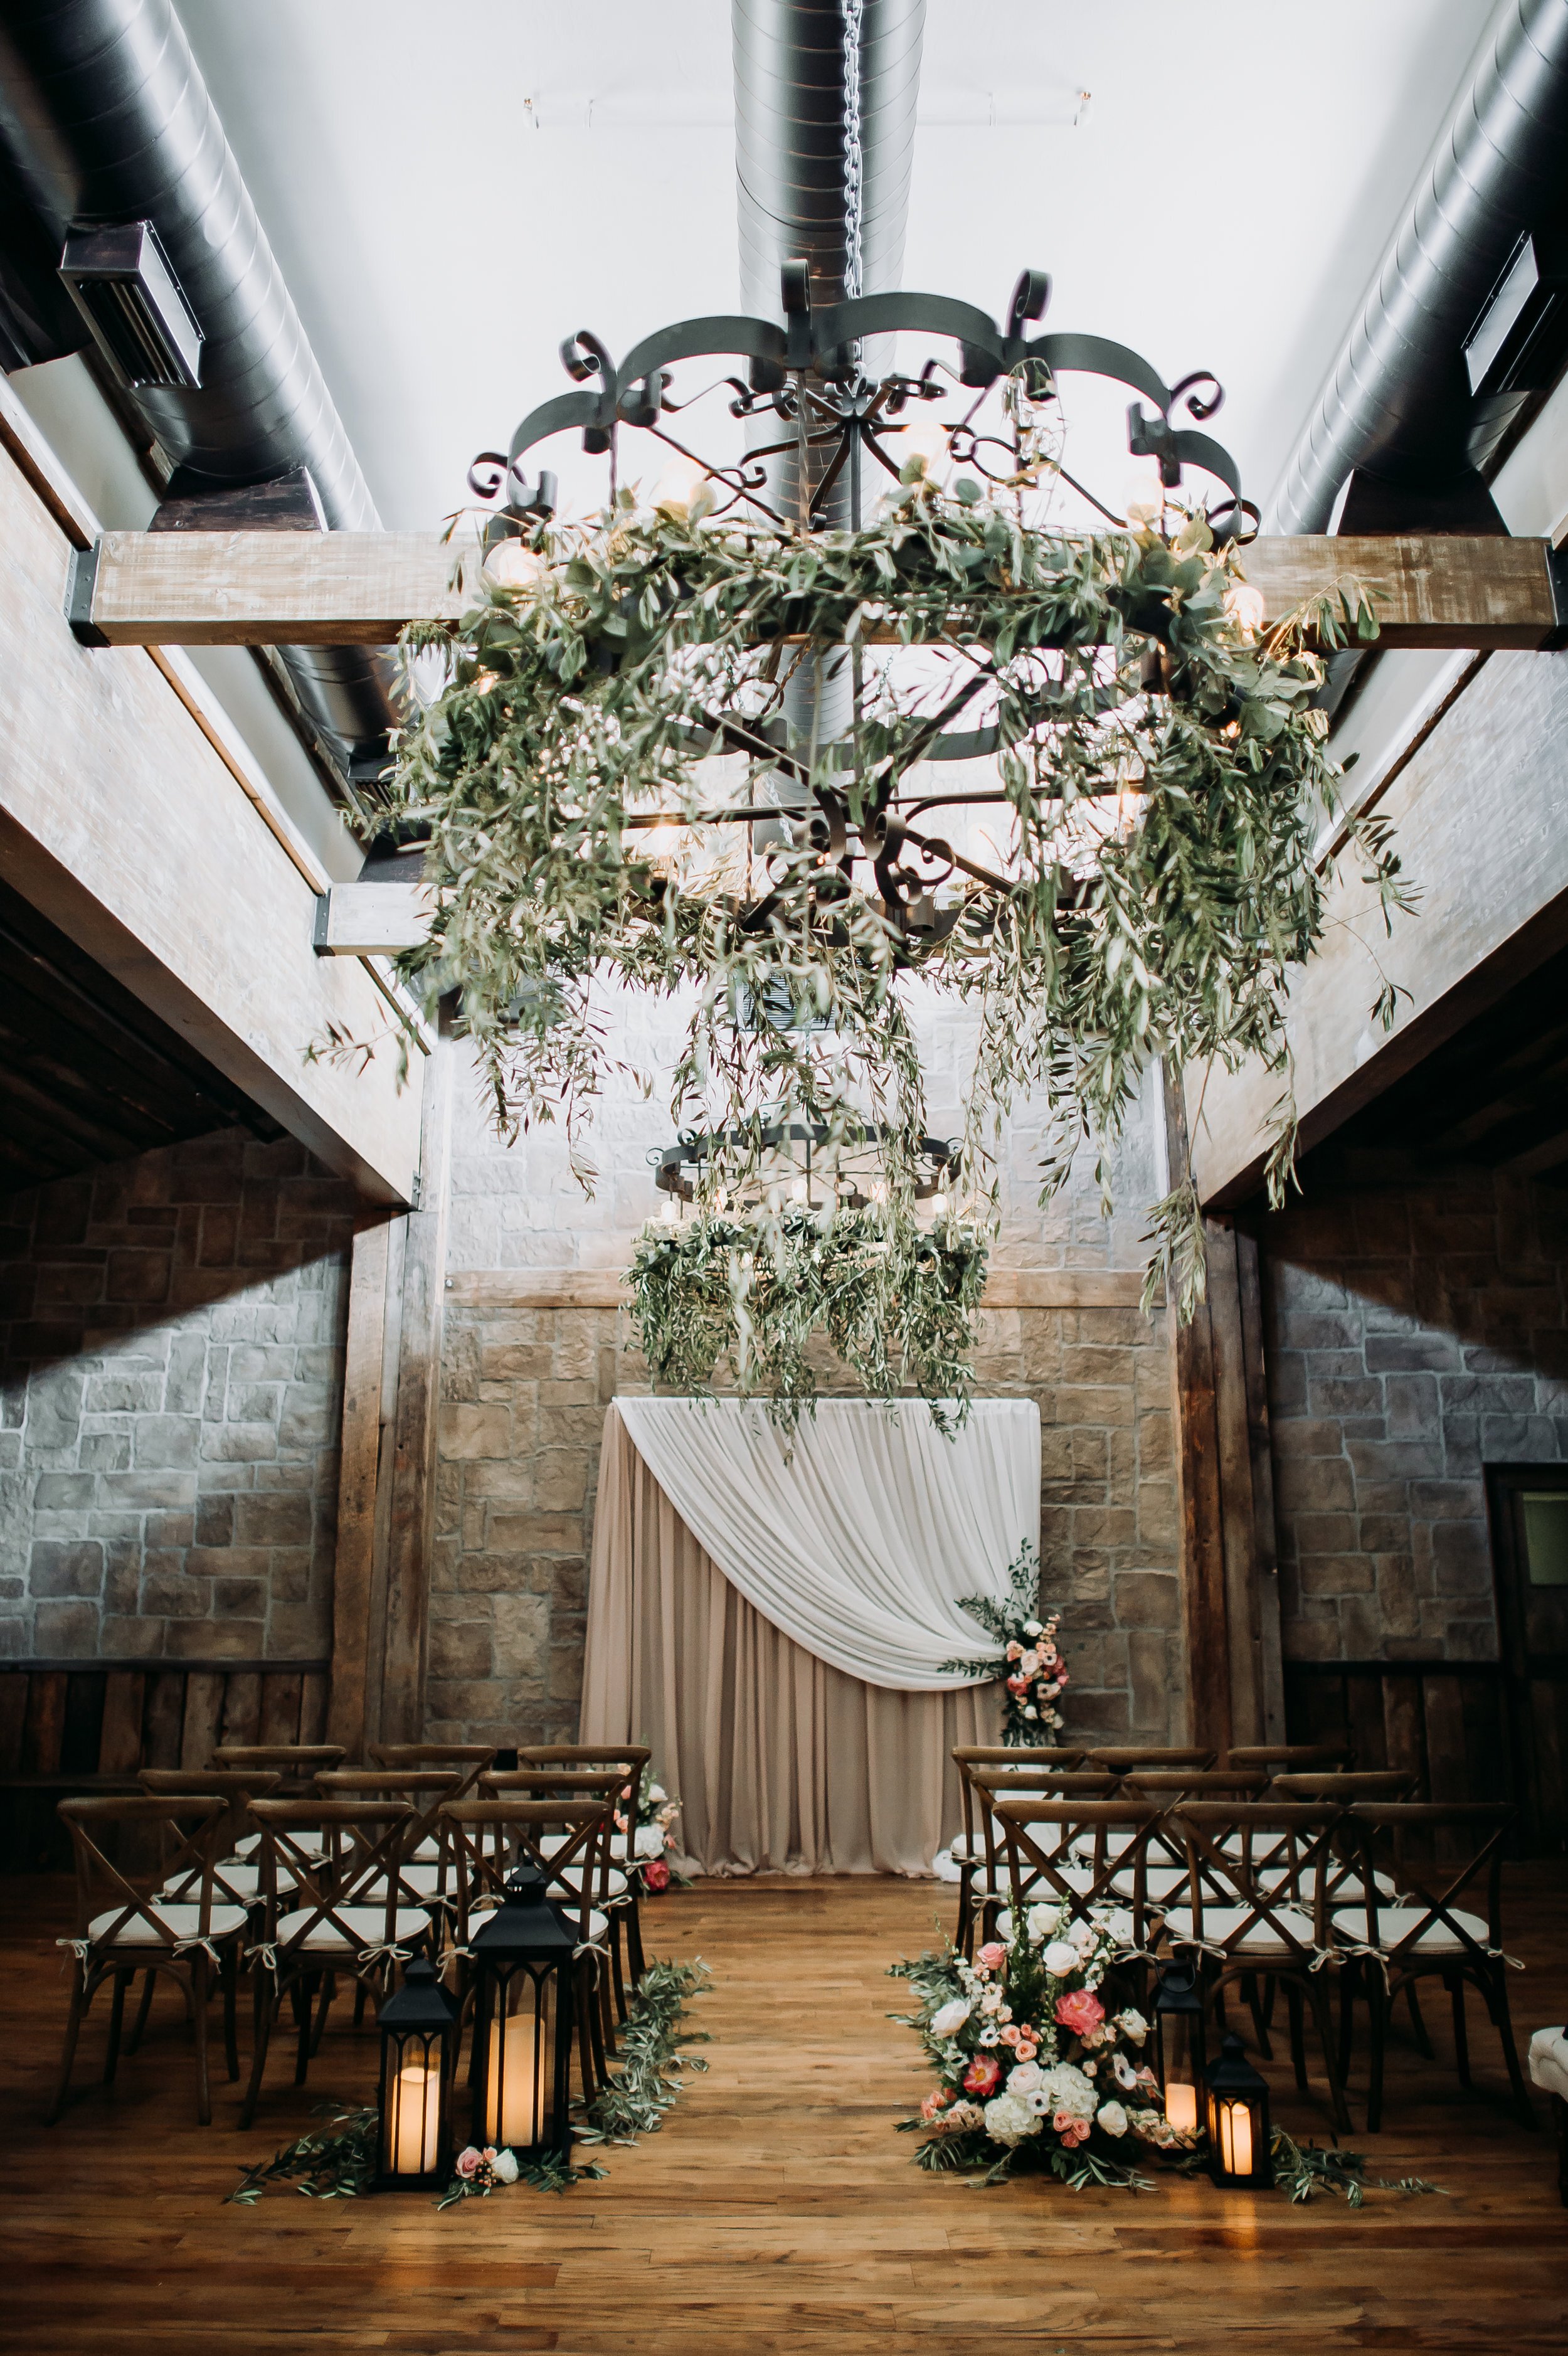 www.santabarbarawedding.com | Michelle Ramirez Photography | Tangled Lotus | Ceremony Aisle with Floral Arrangement Hanging from Overhead Light Fixture